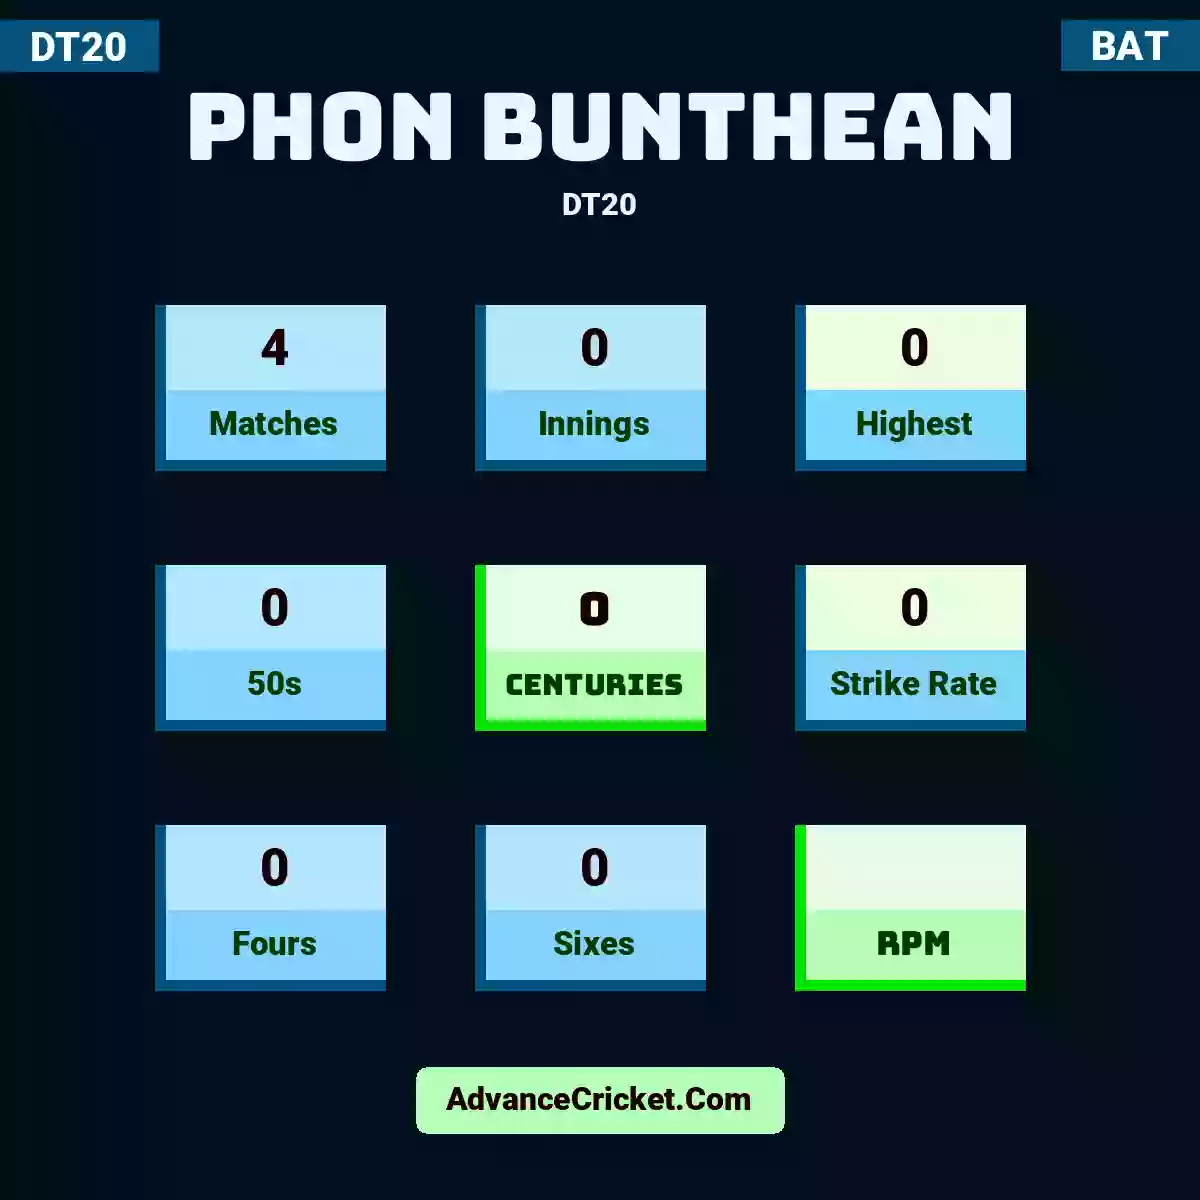 Phon Bunthean DT20 , Phon Bunthean played 4 matches, scored 0 runs as highest, 0 half-centuries, and 0 centuries, with a strike rate of 0. P.Bunthean hit 0 fours and 0 sixes.